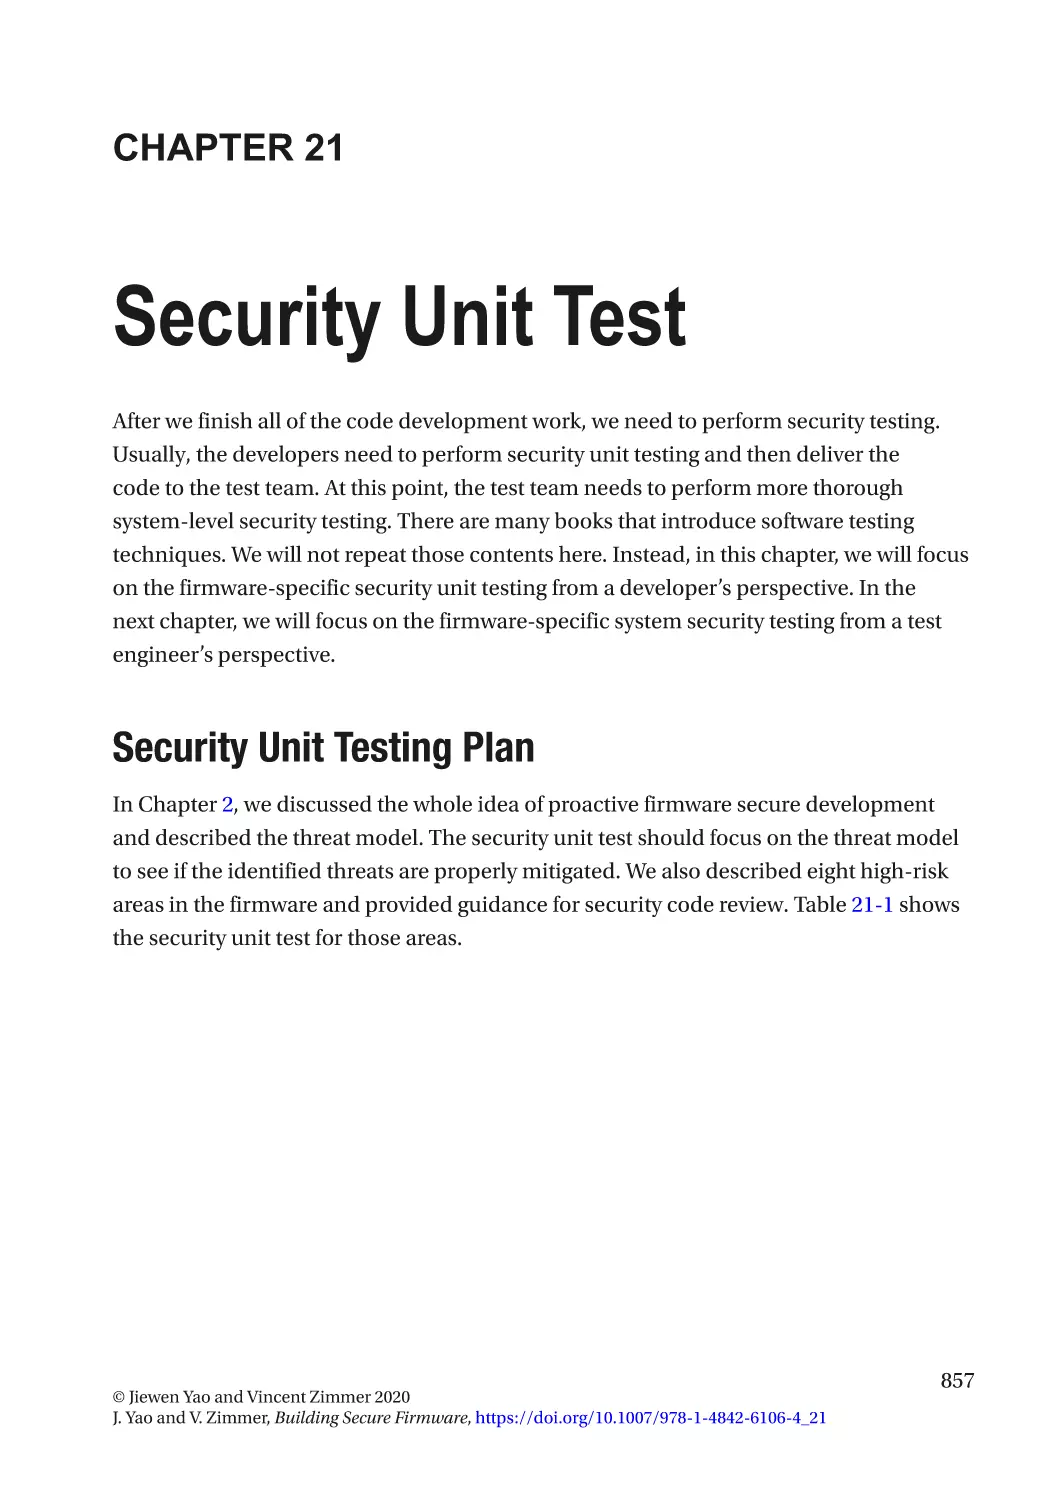 Chapter 21
Security Unit Testing Plan